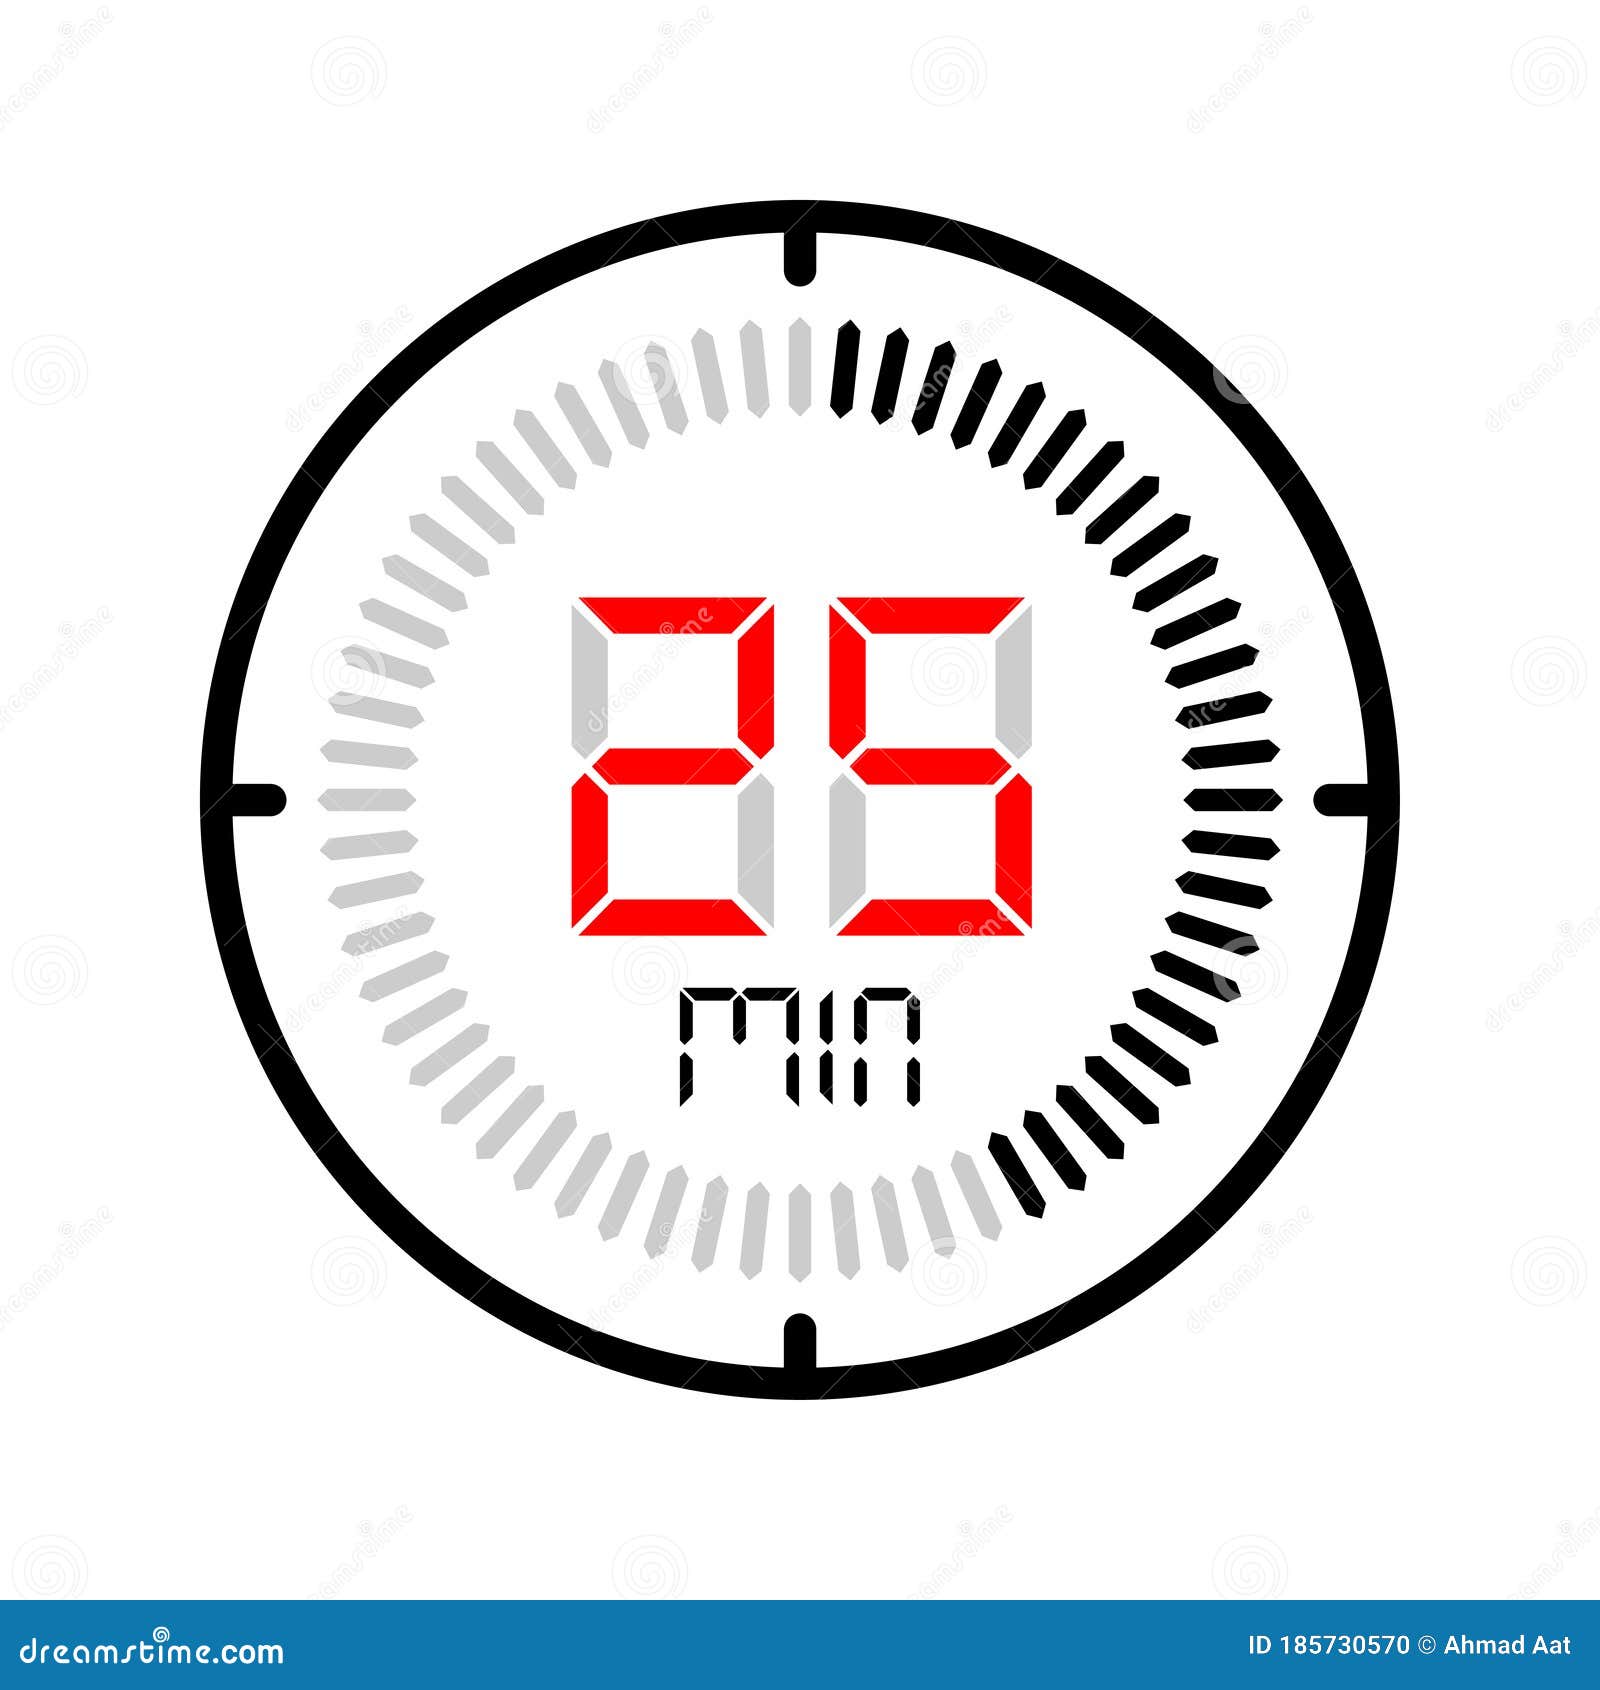 The 25 Minute Icon Isolated On White Background Stock Vector Illustration Of Modern Flat